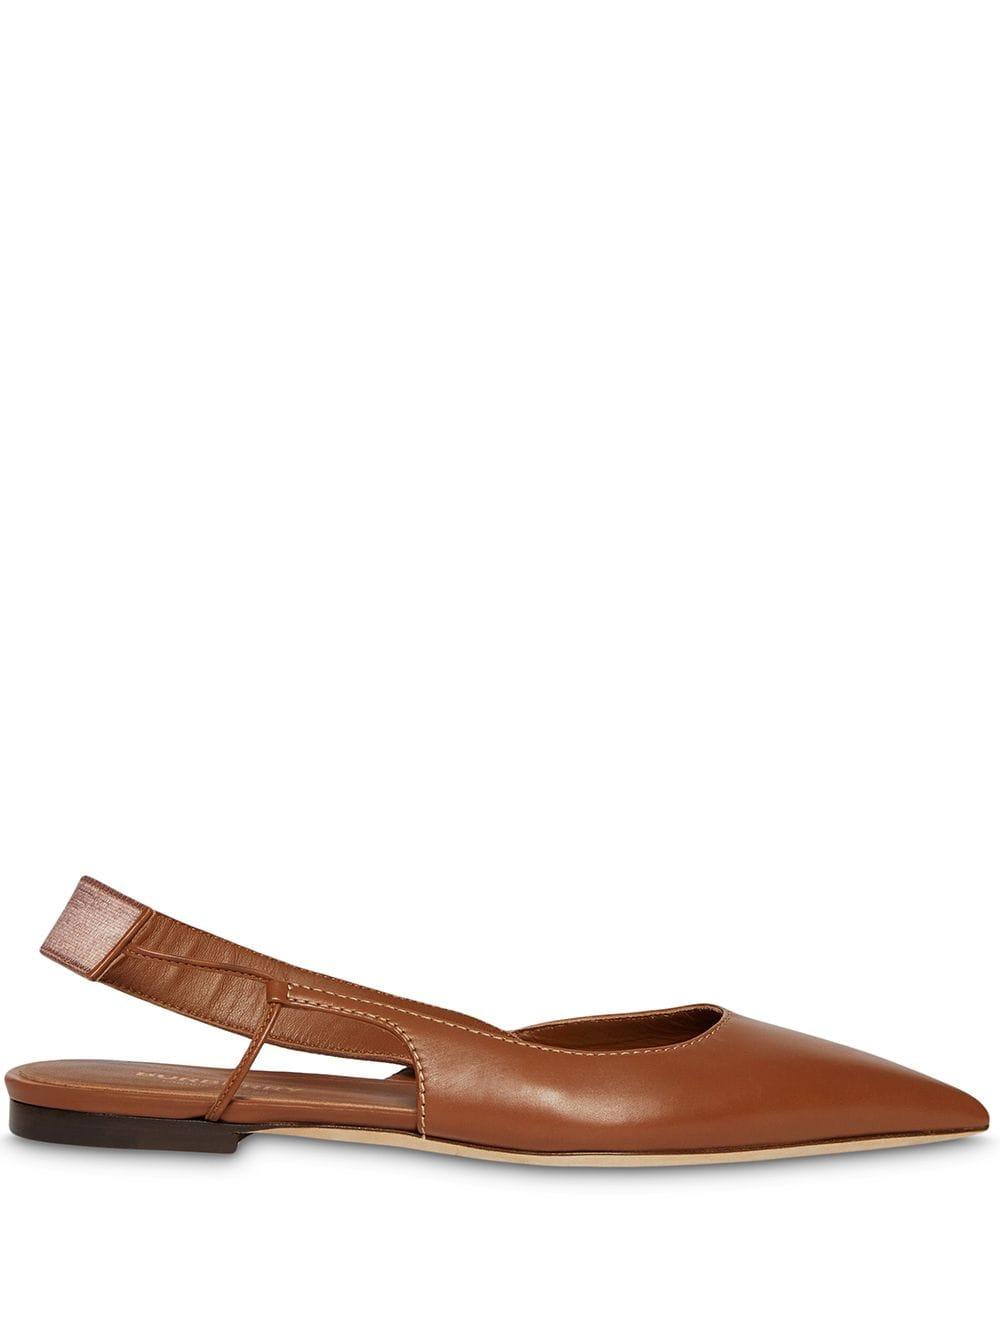 Burberry Leather Maria Flat Slingback Ballet Flats in Tan (Brown) | Lyst